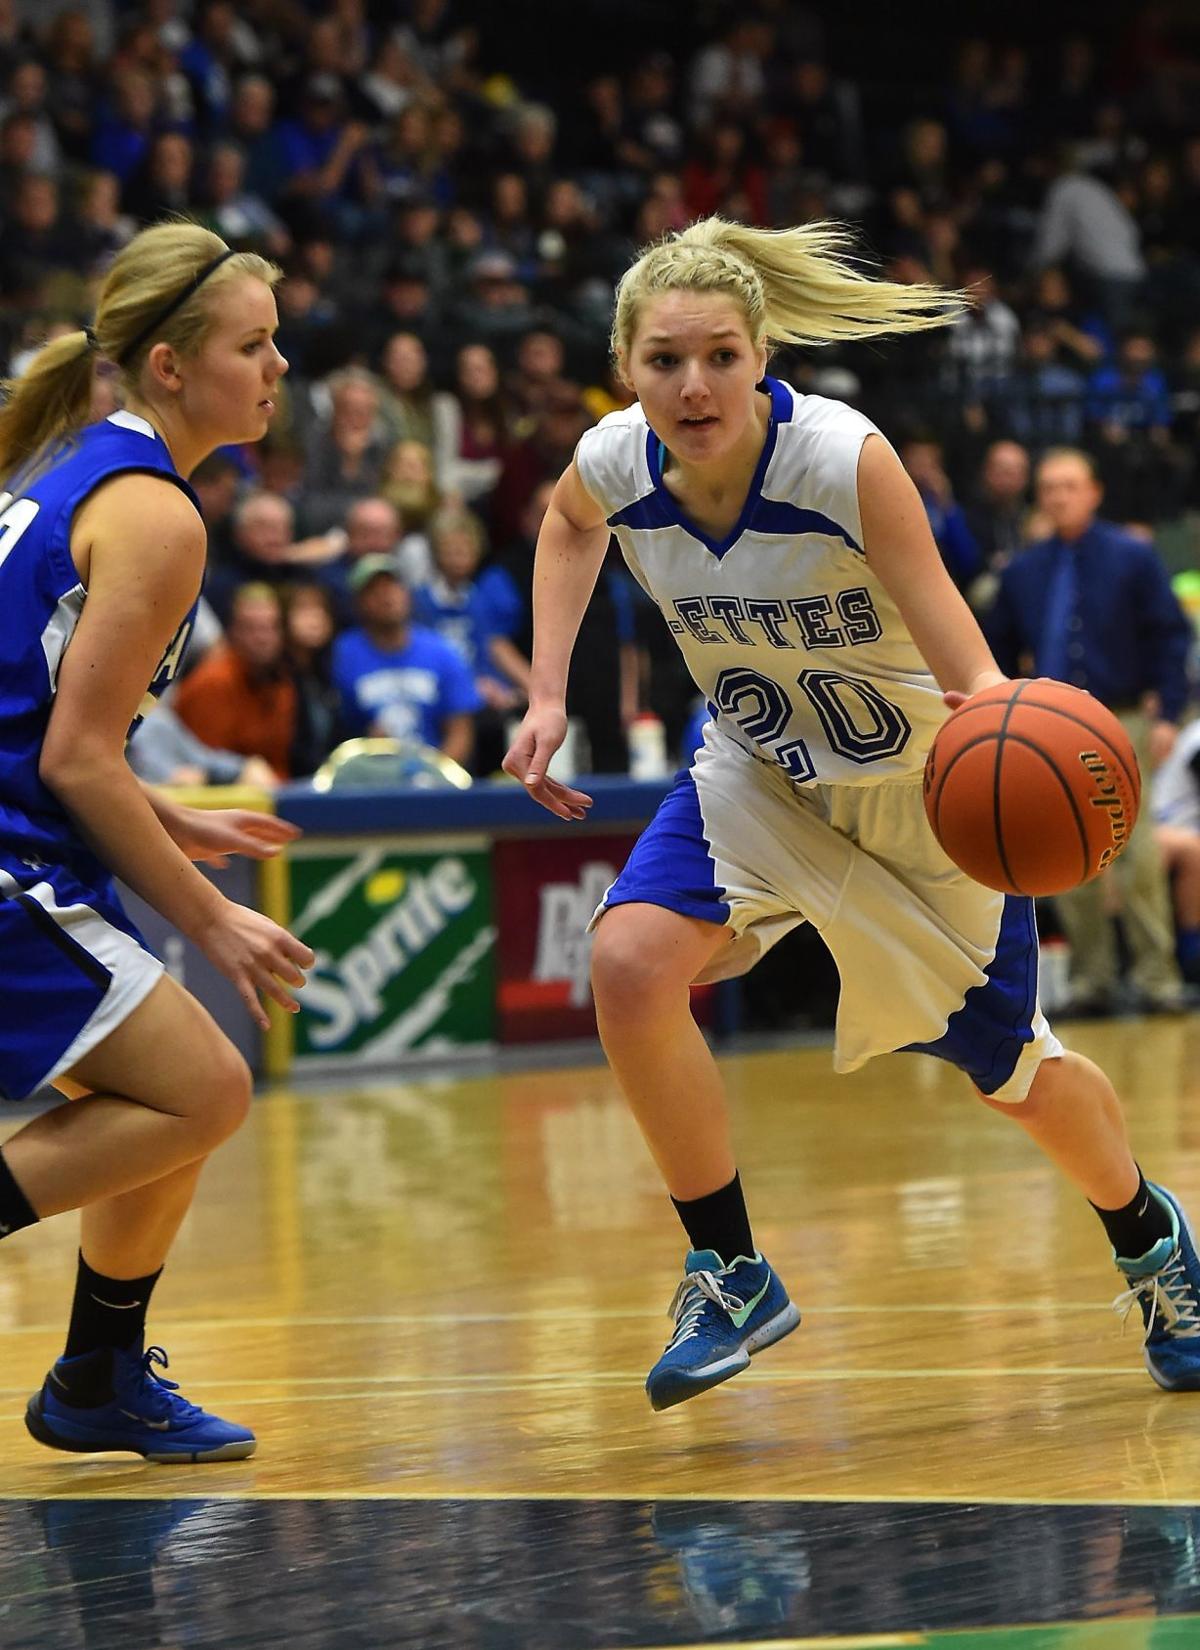 Malta girls hold off Fairfield for second title in a row | High School Basketball ...